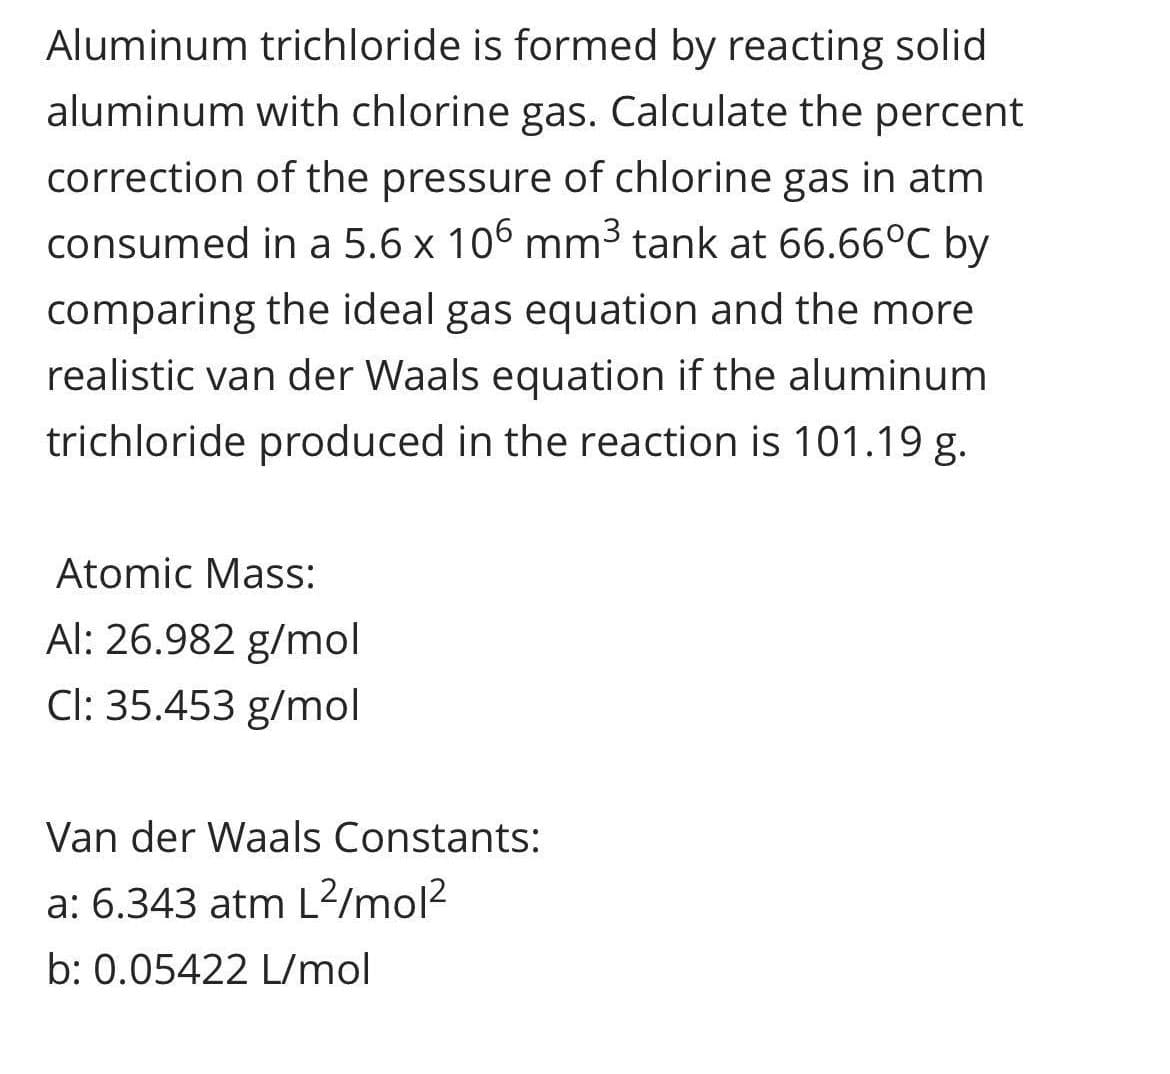 Aluminum trichloride is formed by reacting solid
aluminum with chlorine gas. Calculate the percent
correction of the pressure of chlorine gas in atm
consumed in a 5.6 x 106 mm³ tank at 66.66°C by
comparing the ideal gas equation and the more
realistic van der Waals equation if the aluminum
trichloride produced in the reaction is 101.19 g.
Atomic Mass:
Al: 26.982 g/mol
Cl: 35.453 g/mol
Van der Waals Constants:
a: 6.343 atm L2/mol2
b: 0.05422 L/mol
